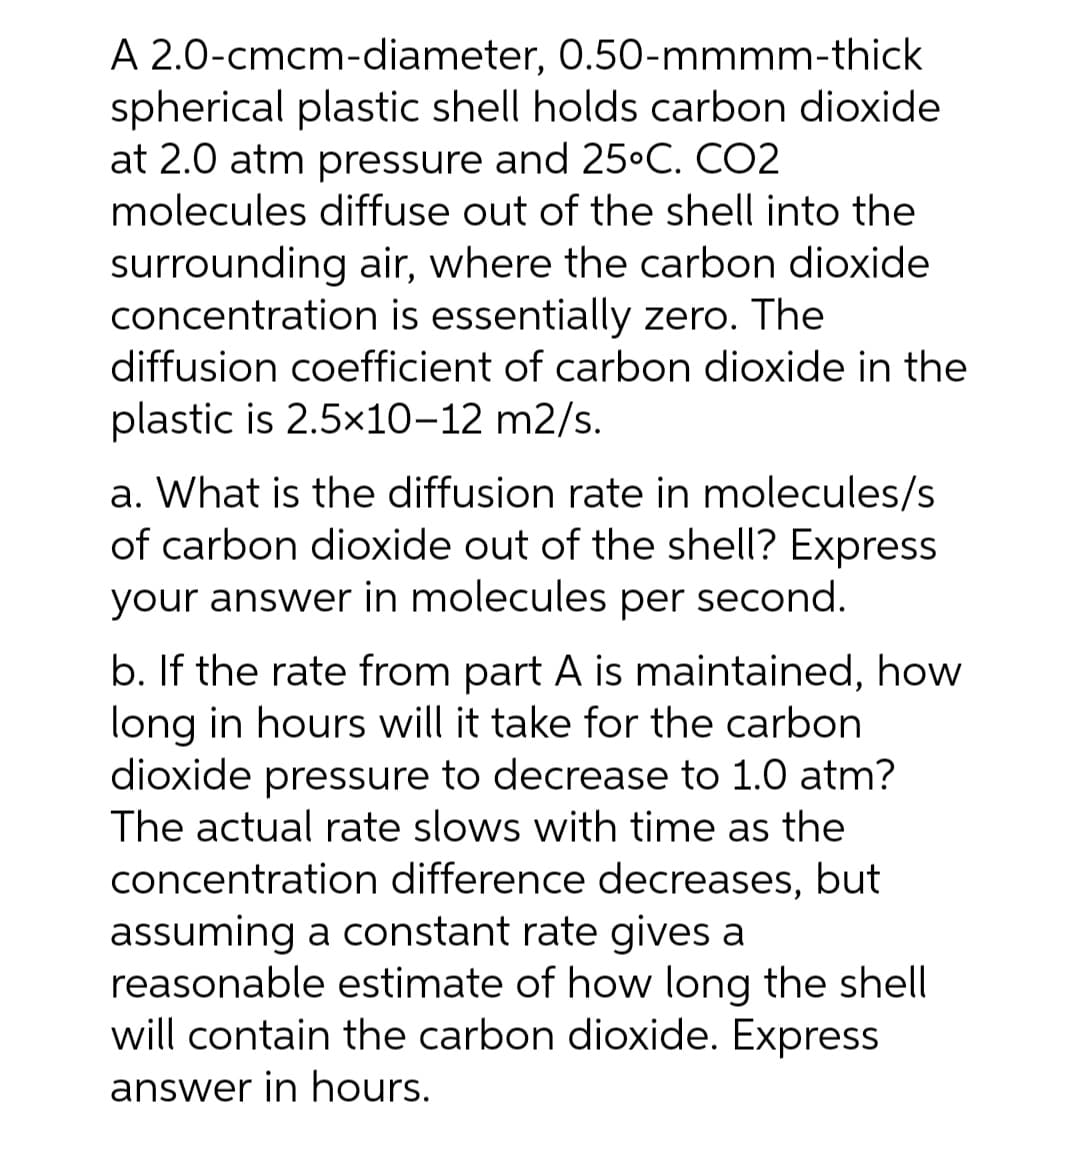 A 2.0-cmcm-diameter, 0.50-mmmm-thick
spherical plastic shell holds carbon dioxide
at 2.0 atm pressure and 25°C. CO2
molecules diffuse out of the shell into the
surrounding air, where the carbon dioxide
concentration is essentially zero. The
diffusion coefficient of carbon dioxide in the
plastic is 2.5x10-12 m2/s.
a. What is the diffusion rate in molecules/s
of carbon dioxide out of the shell? Express
your answer in molecules per second.
b. If the rate from part A is maintained, how
long in hours will it take for the carbon
dioxide pressure to decrease to 1.0 atm?
The actual rate slows with time as the
concentration difference decreases, but
assuming a constant rate gives a
reasonable estimate of how long the shell
will contain the carbon dioxide. Express
answer in hours.
